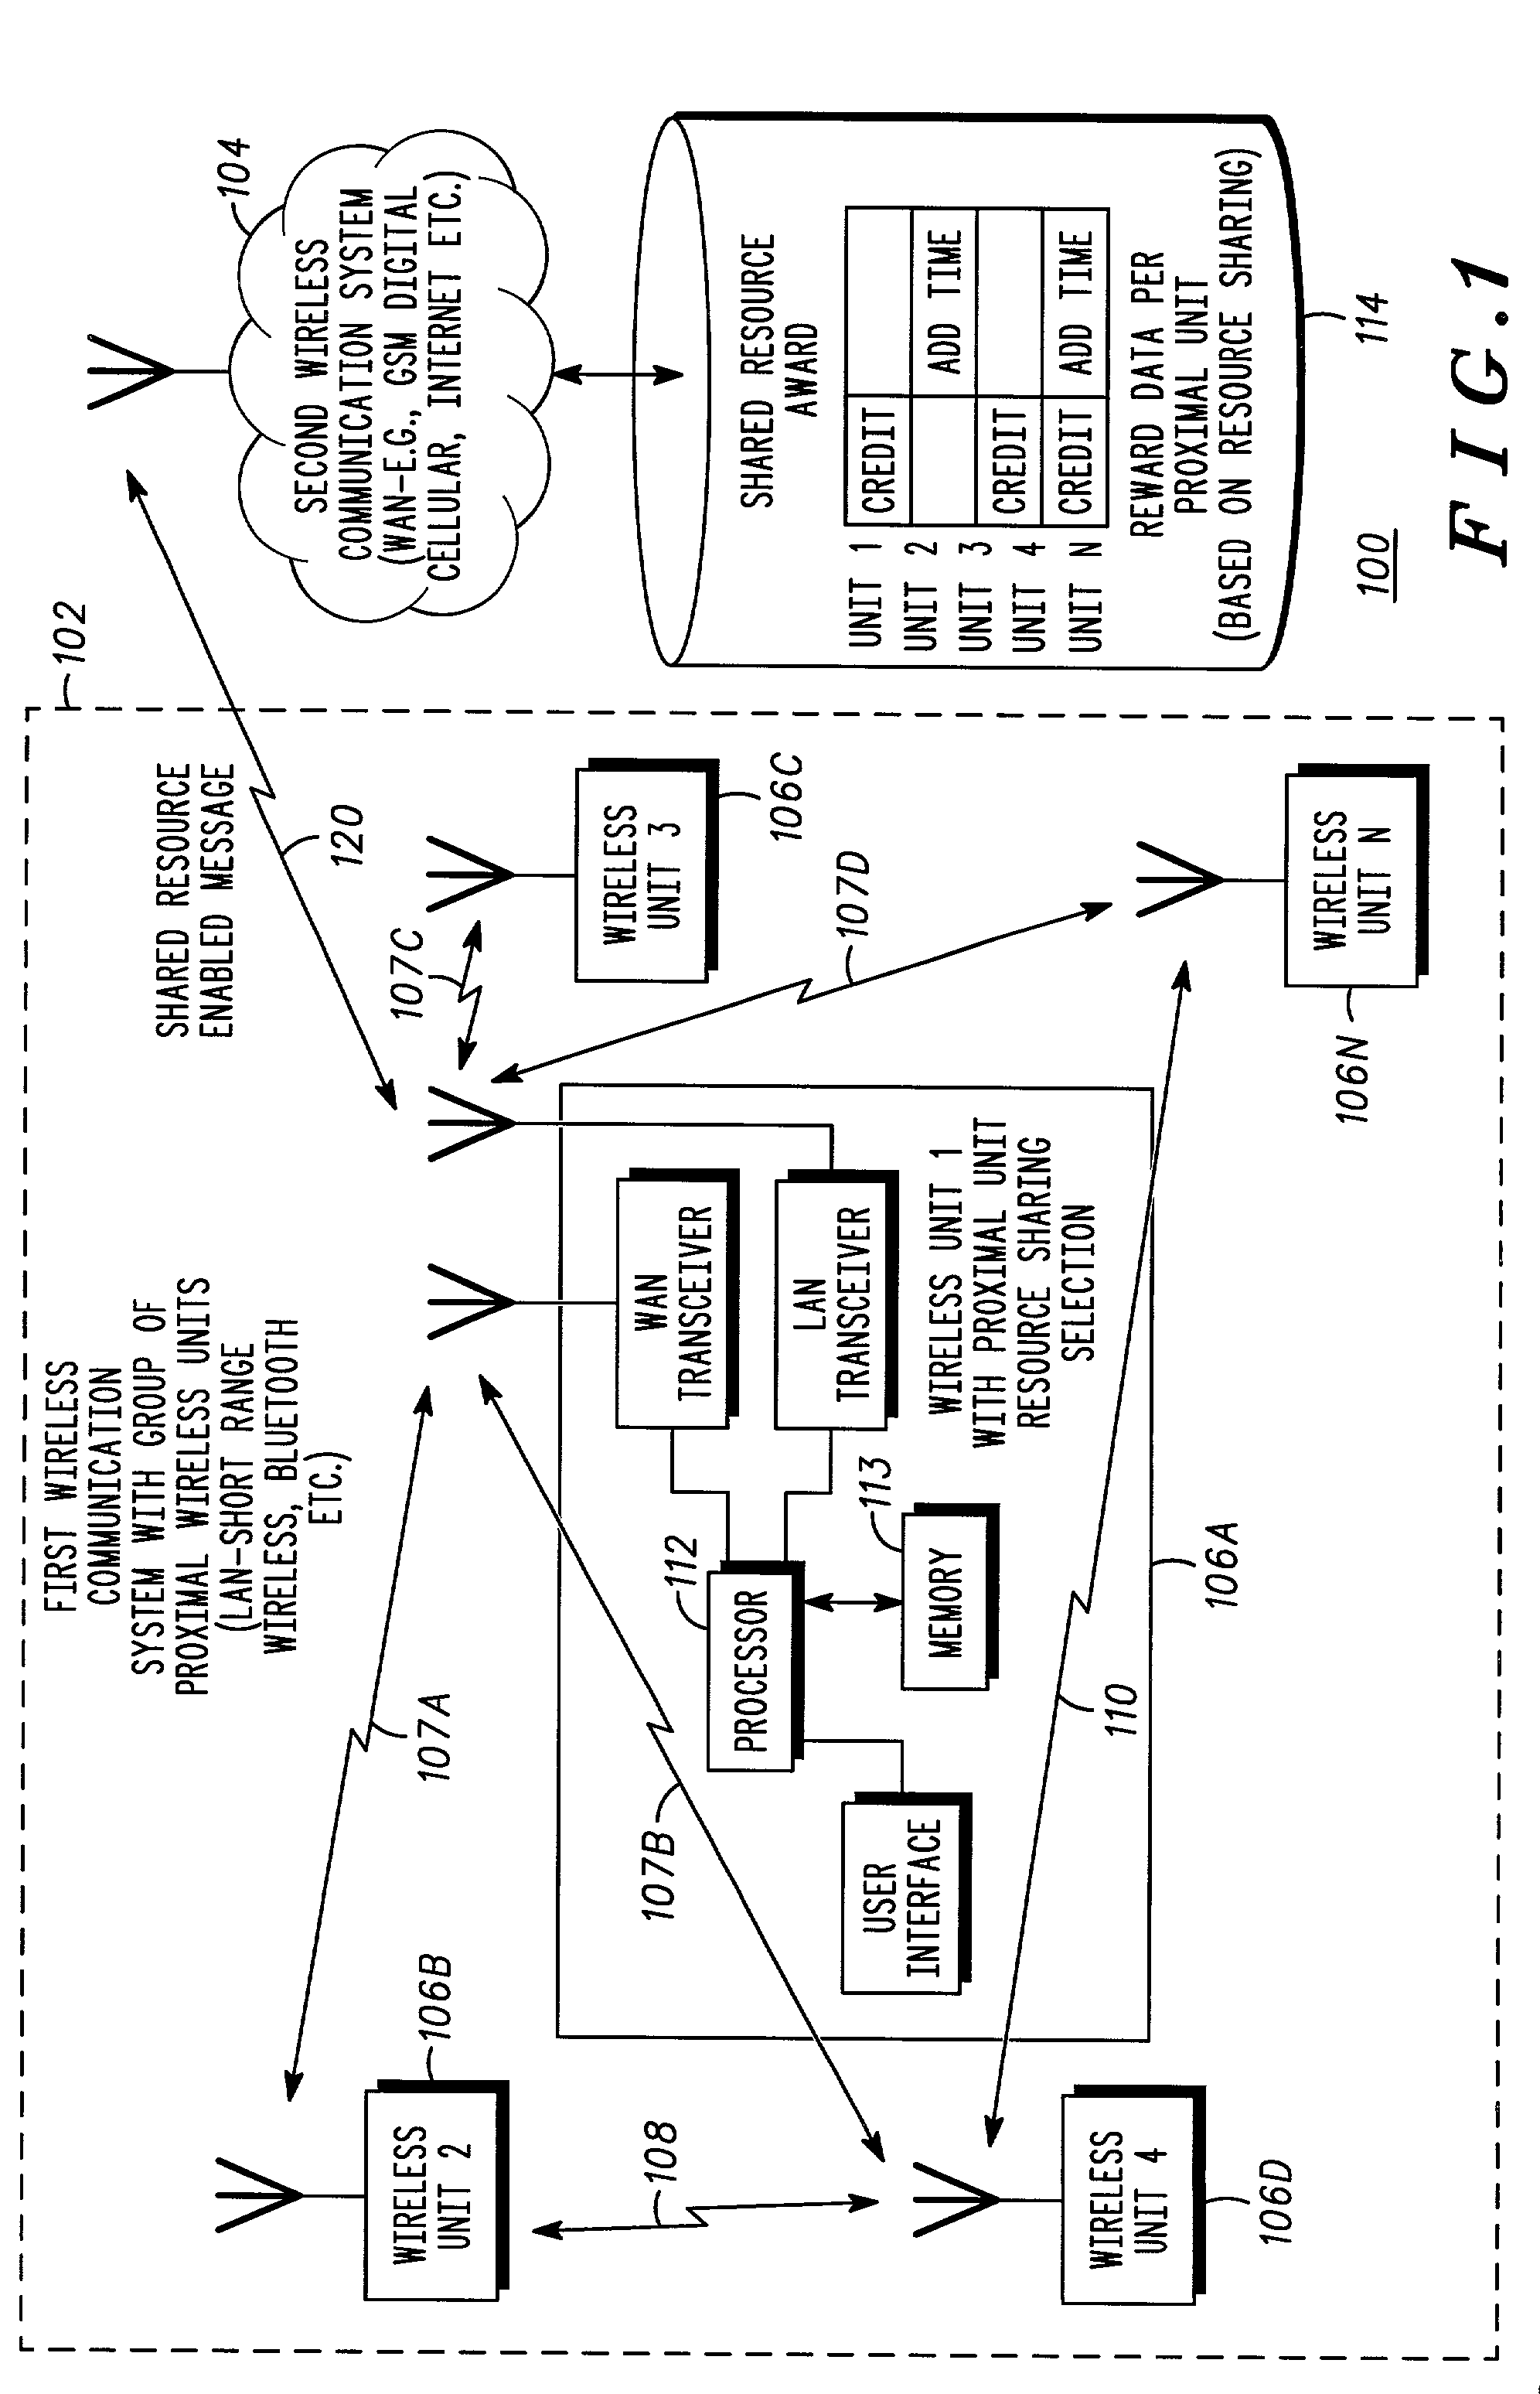 Method and apparatus for aggregation of wireless resources of proximal wireless units to facilitate diversity signal combining